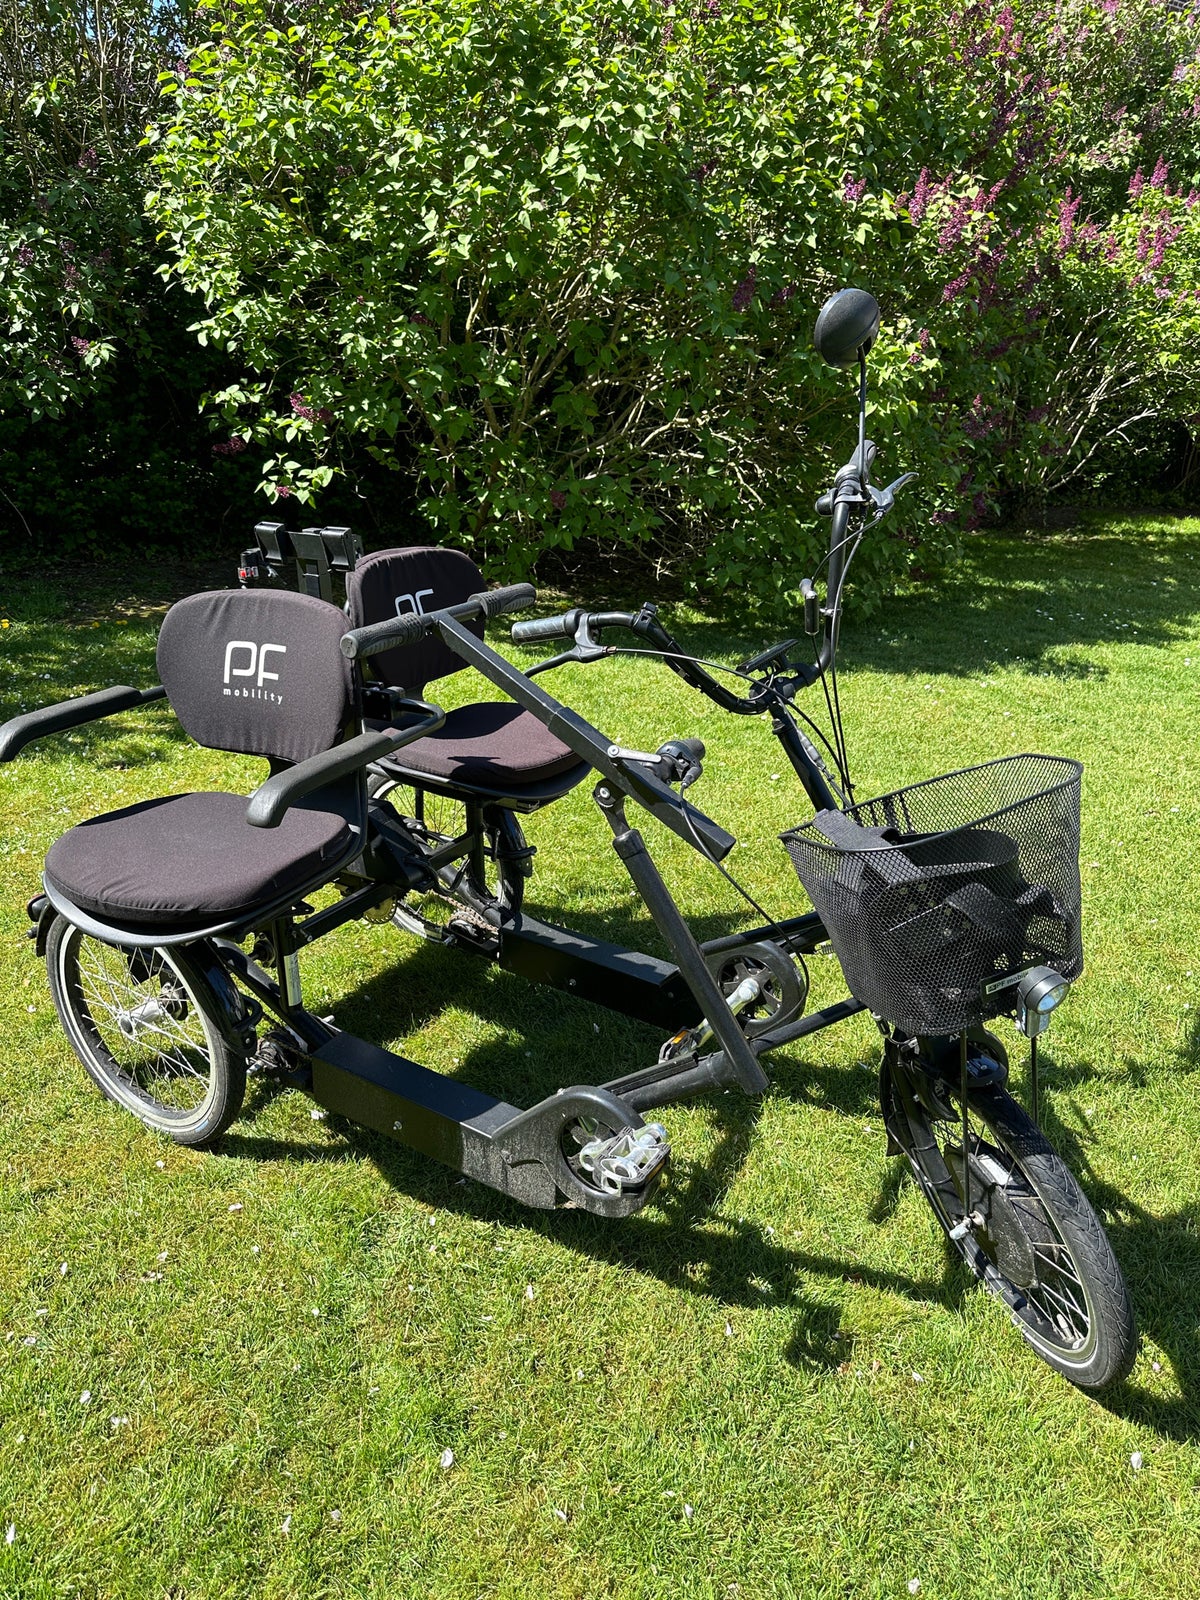 Handicapcykel, 2 personers side-by-side cykel fra PF